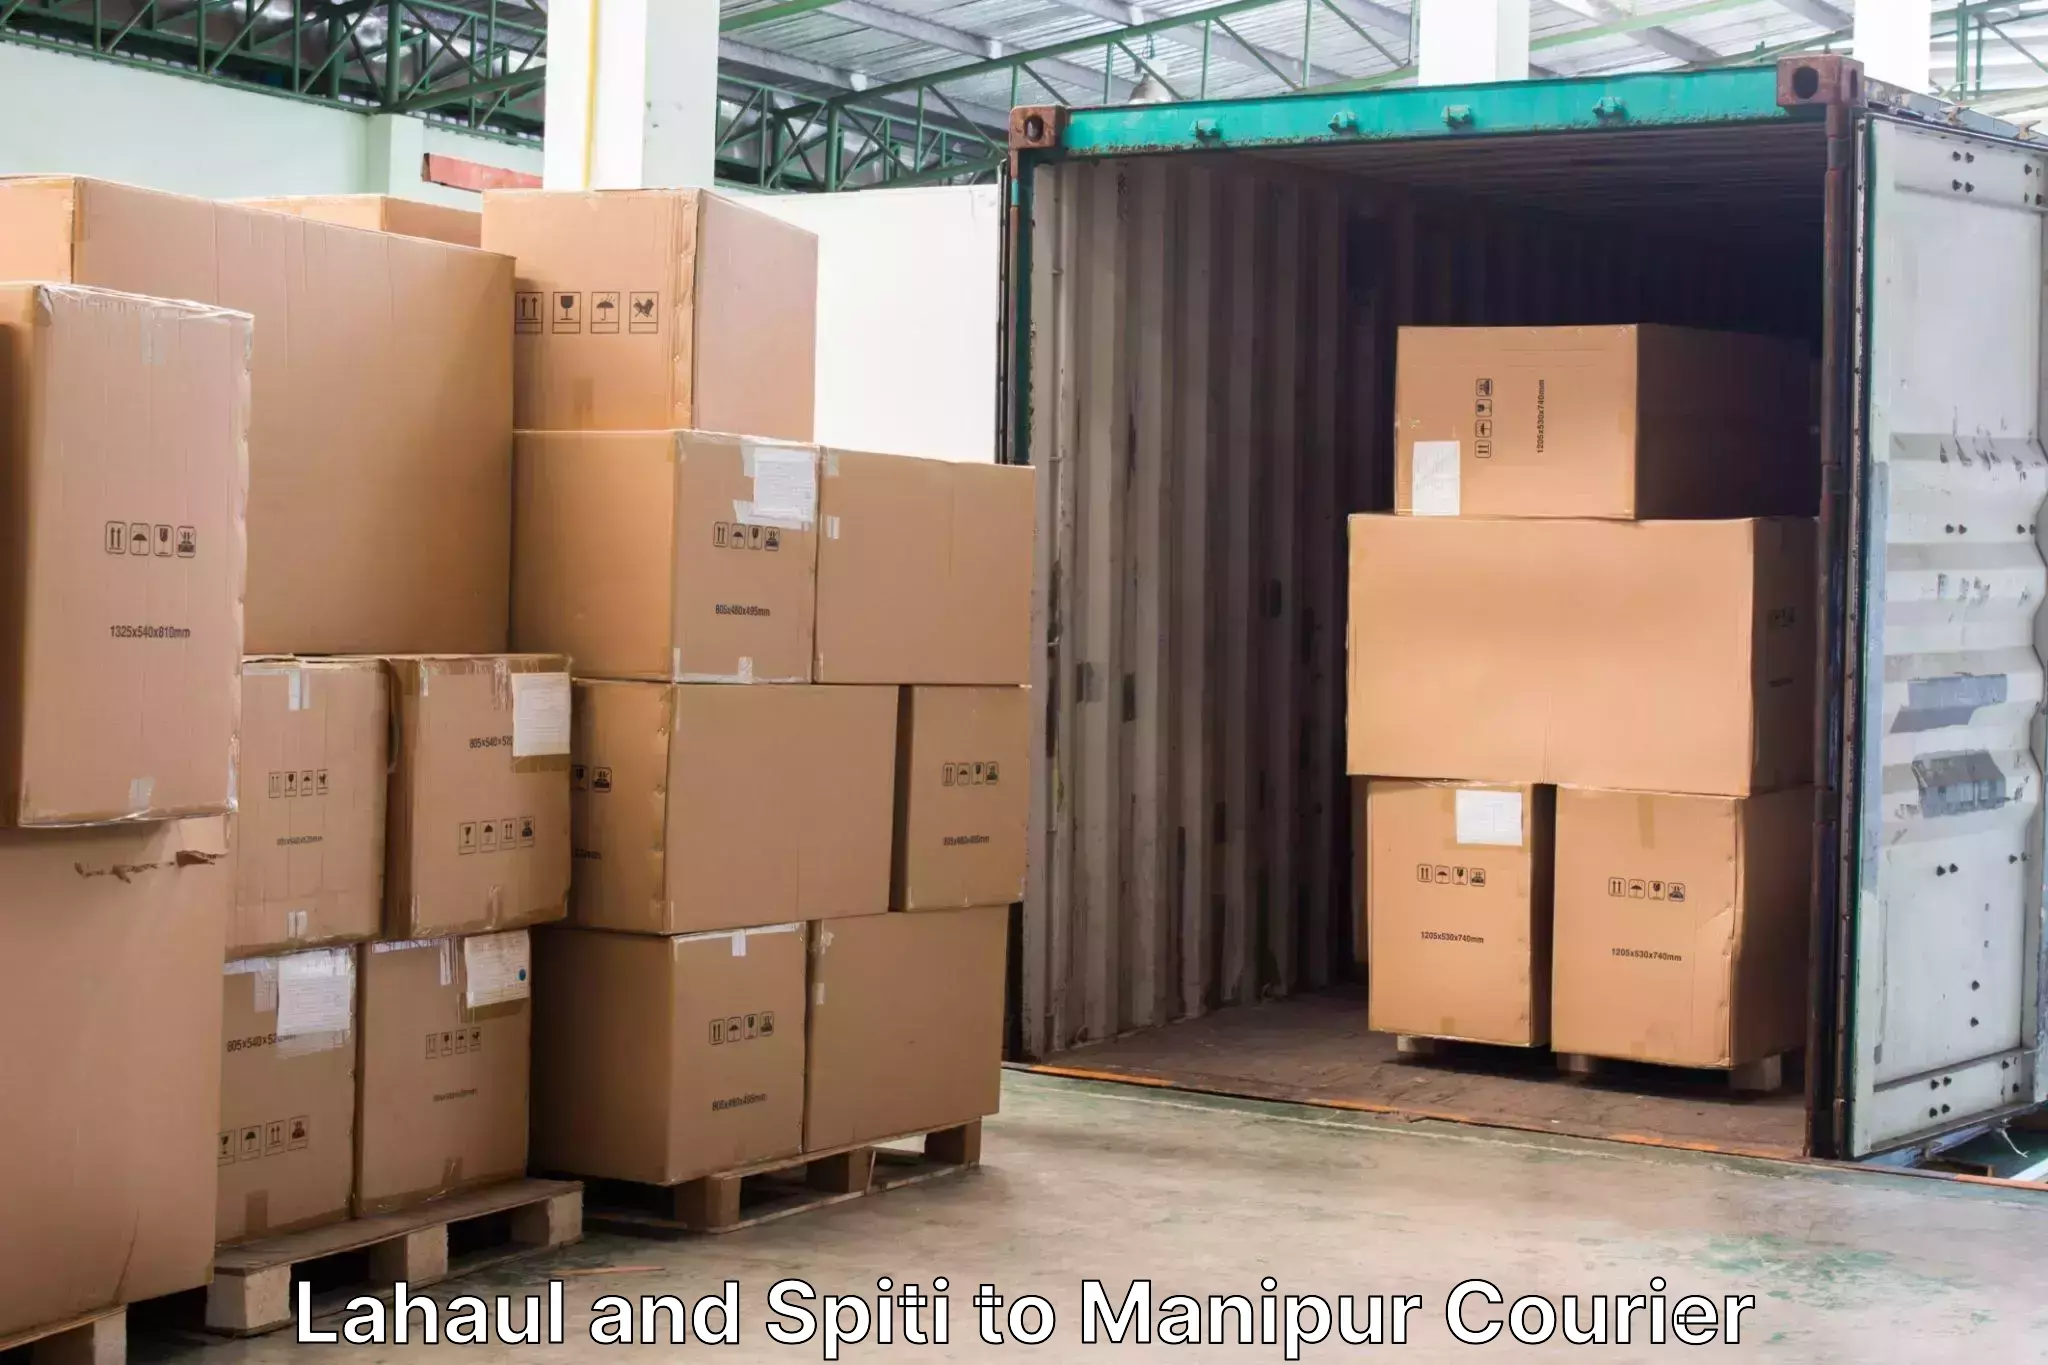 Baggage transport network Lahaul and Spiti to Manipur